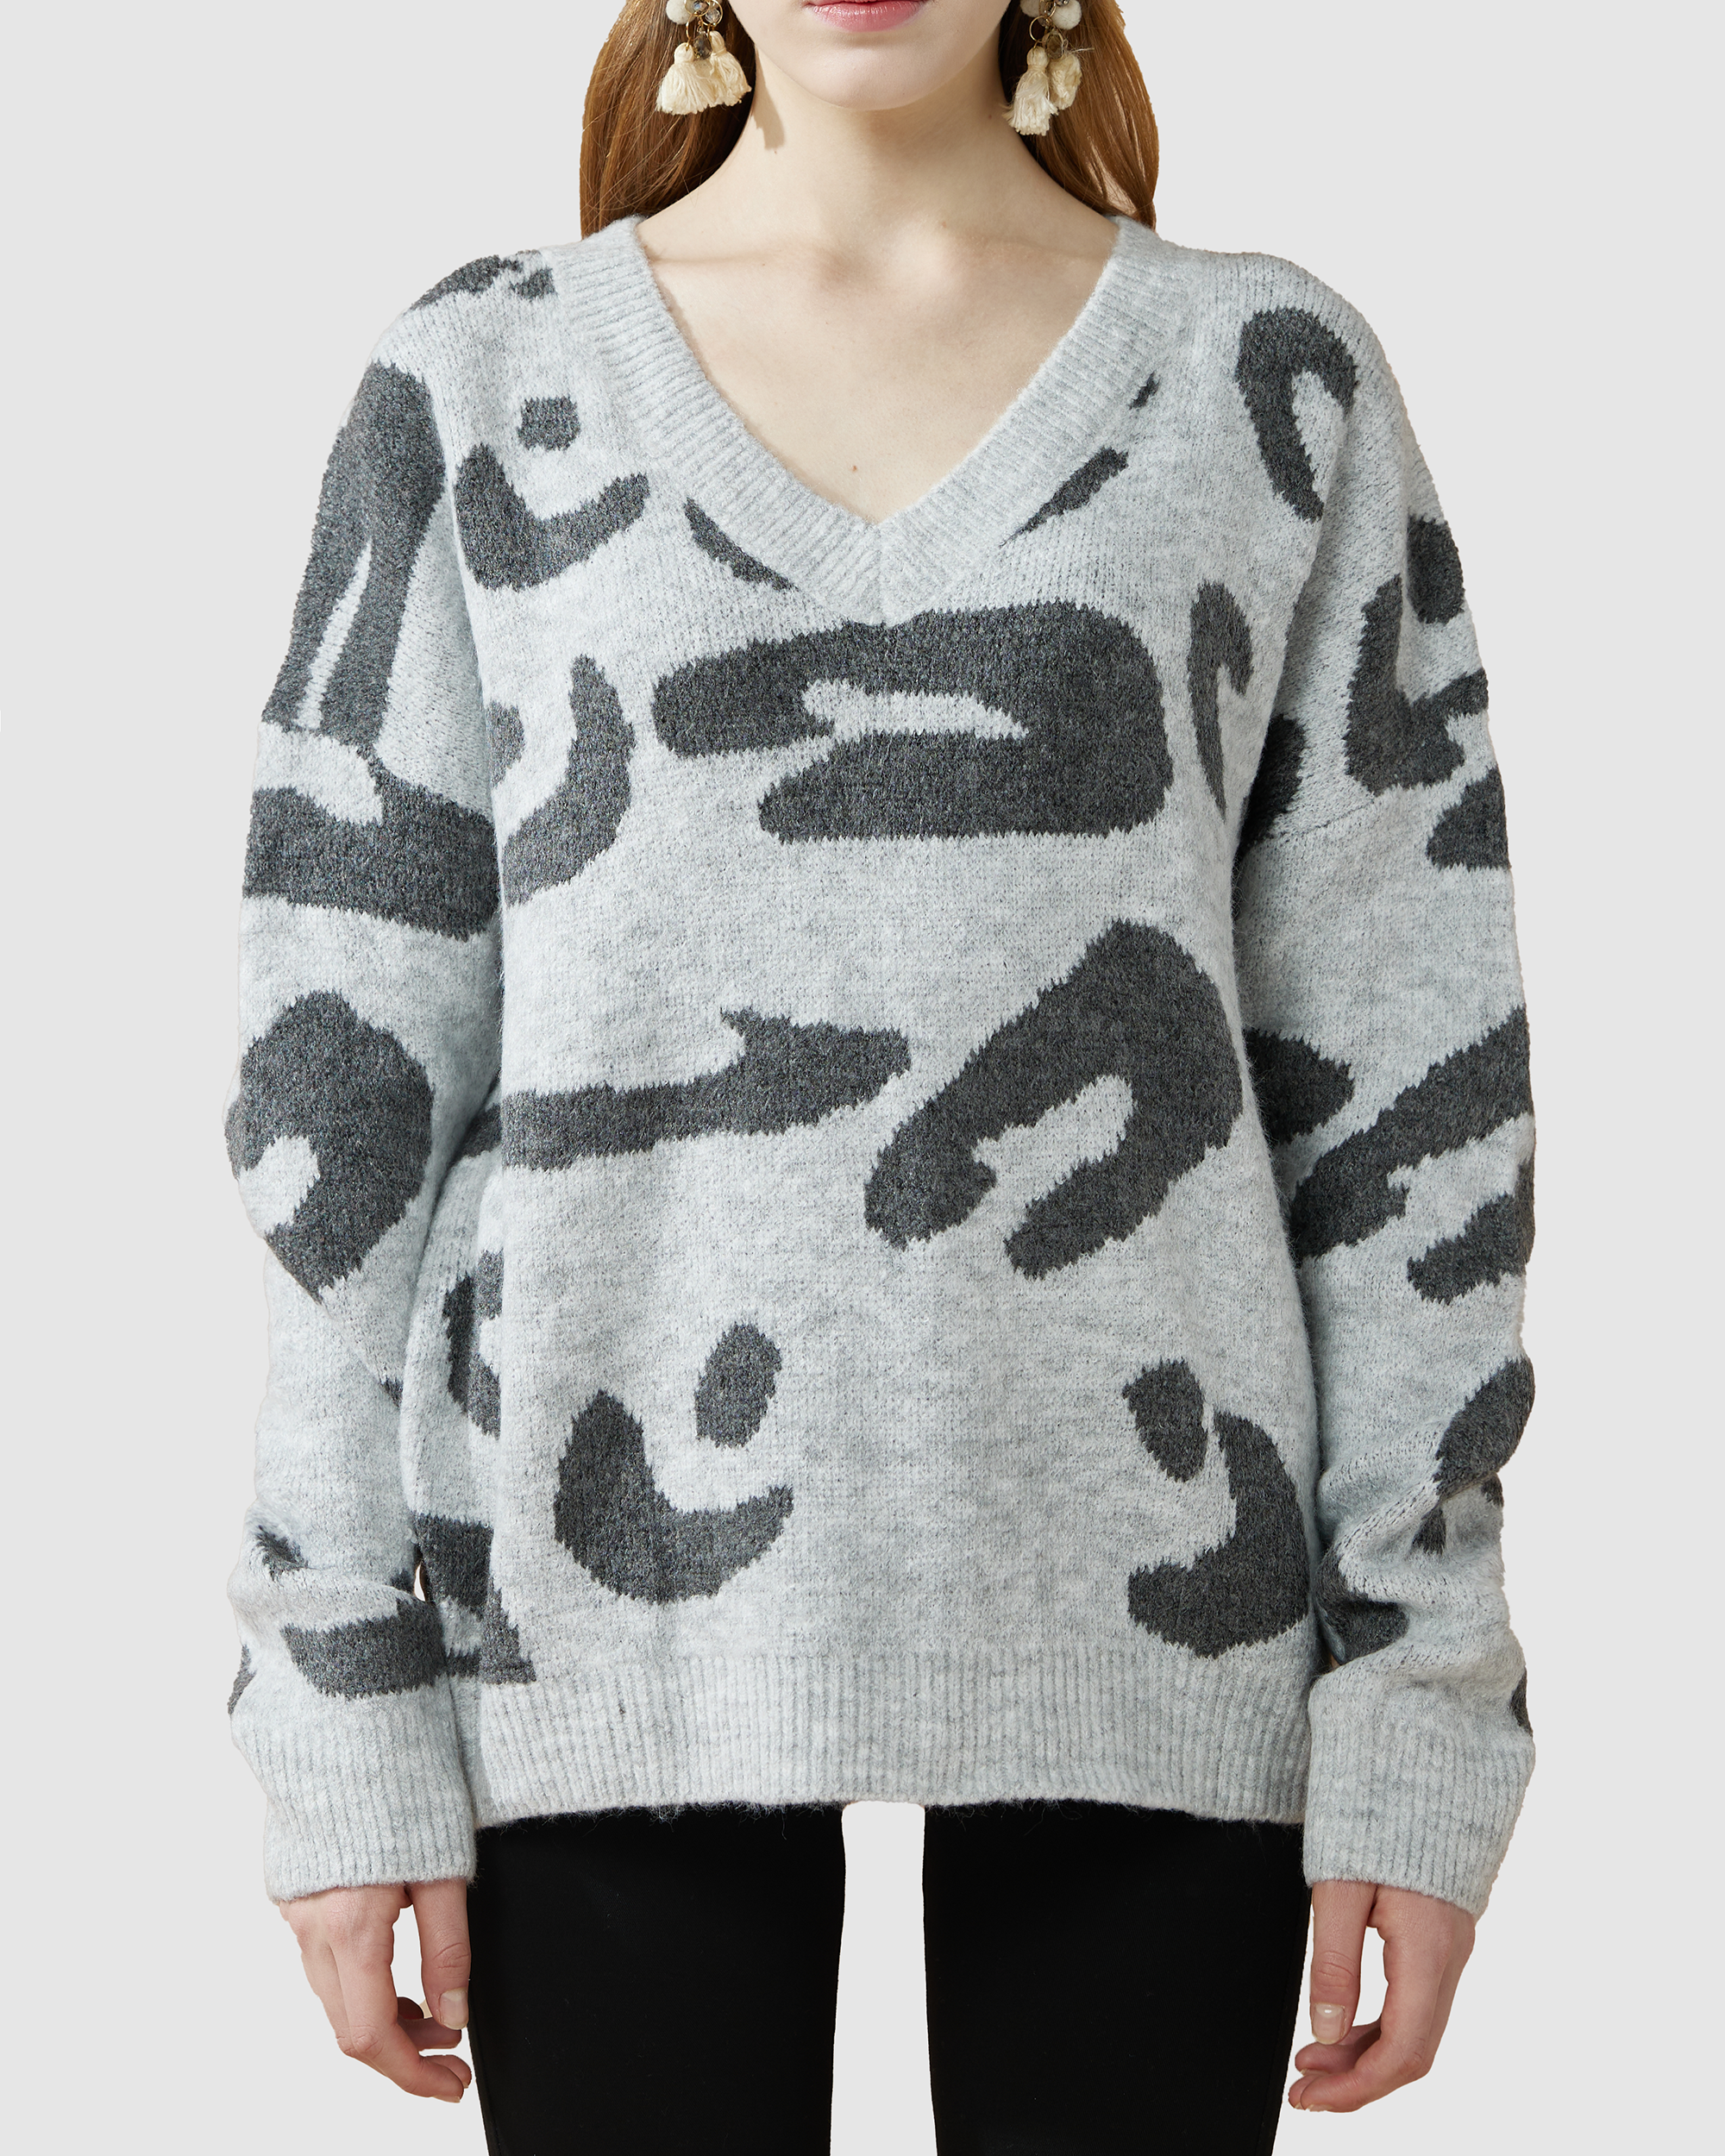 V-Neck Leopard Sweater - Heather Grey/Charcoal